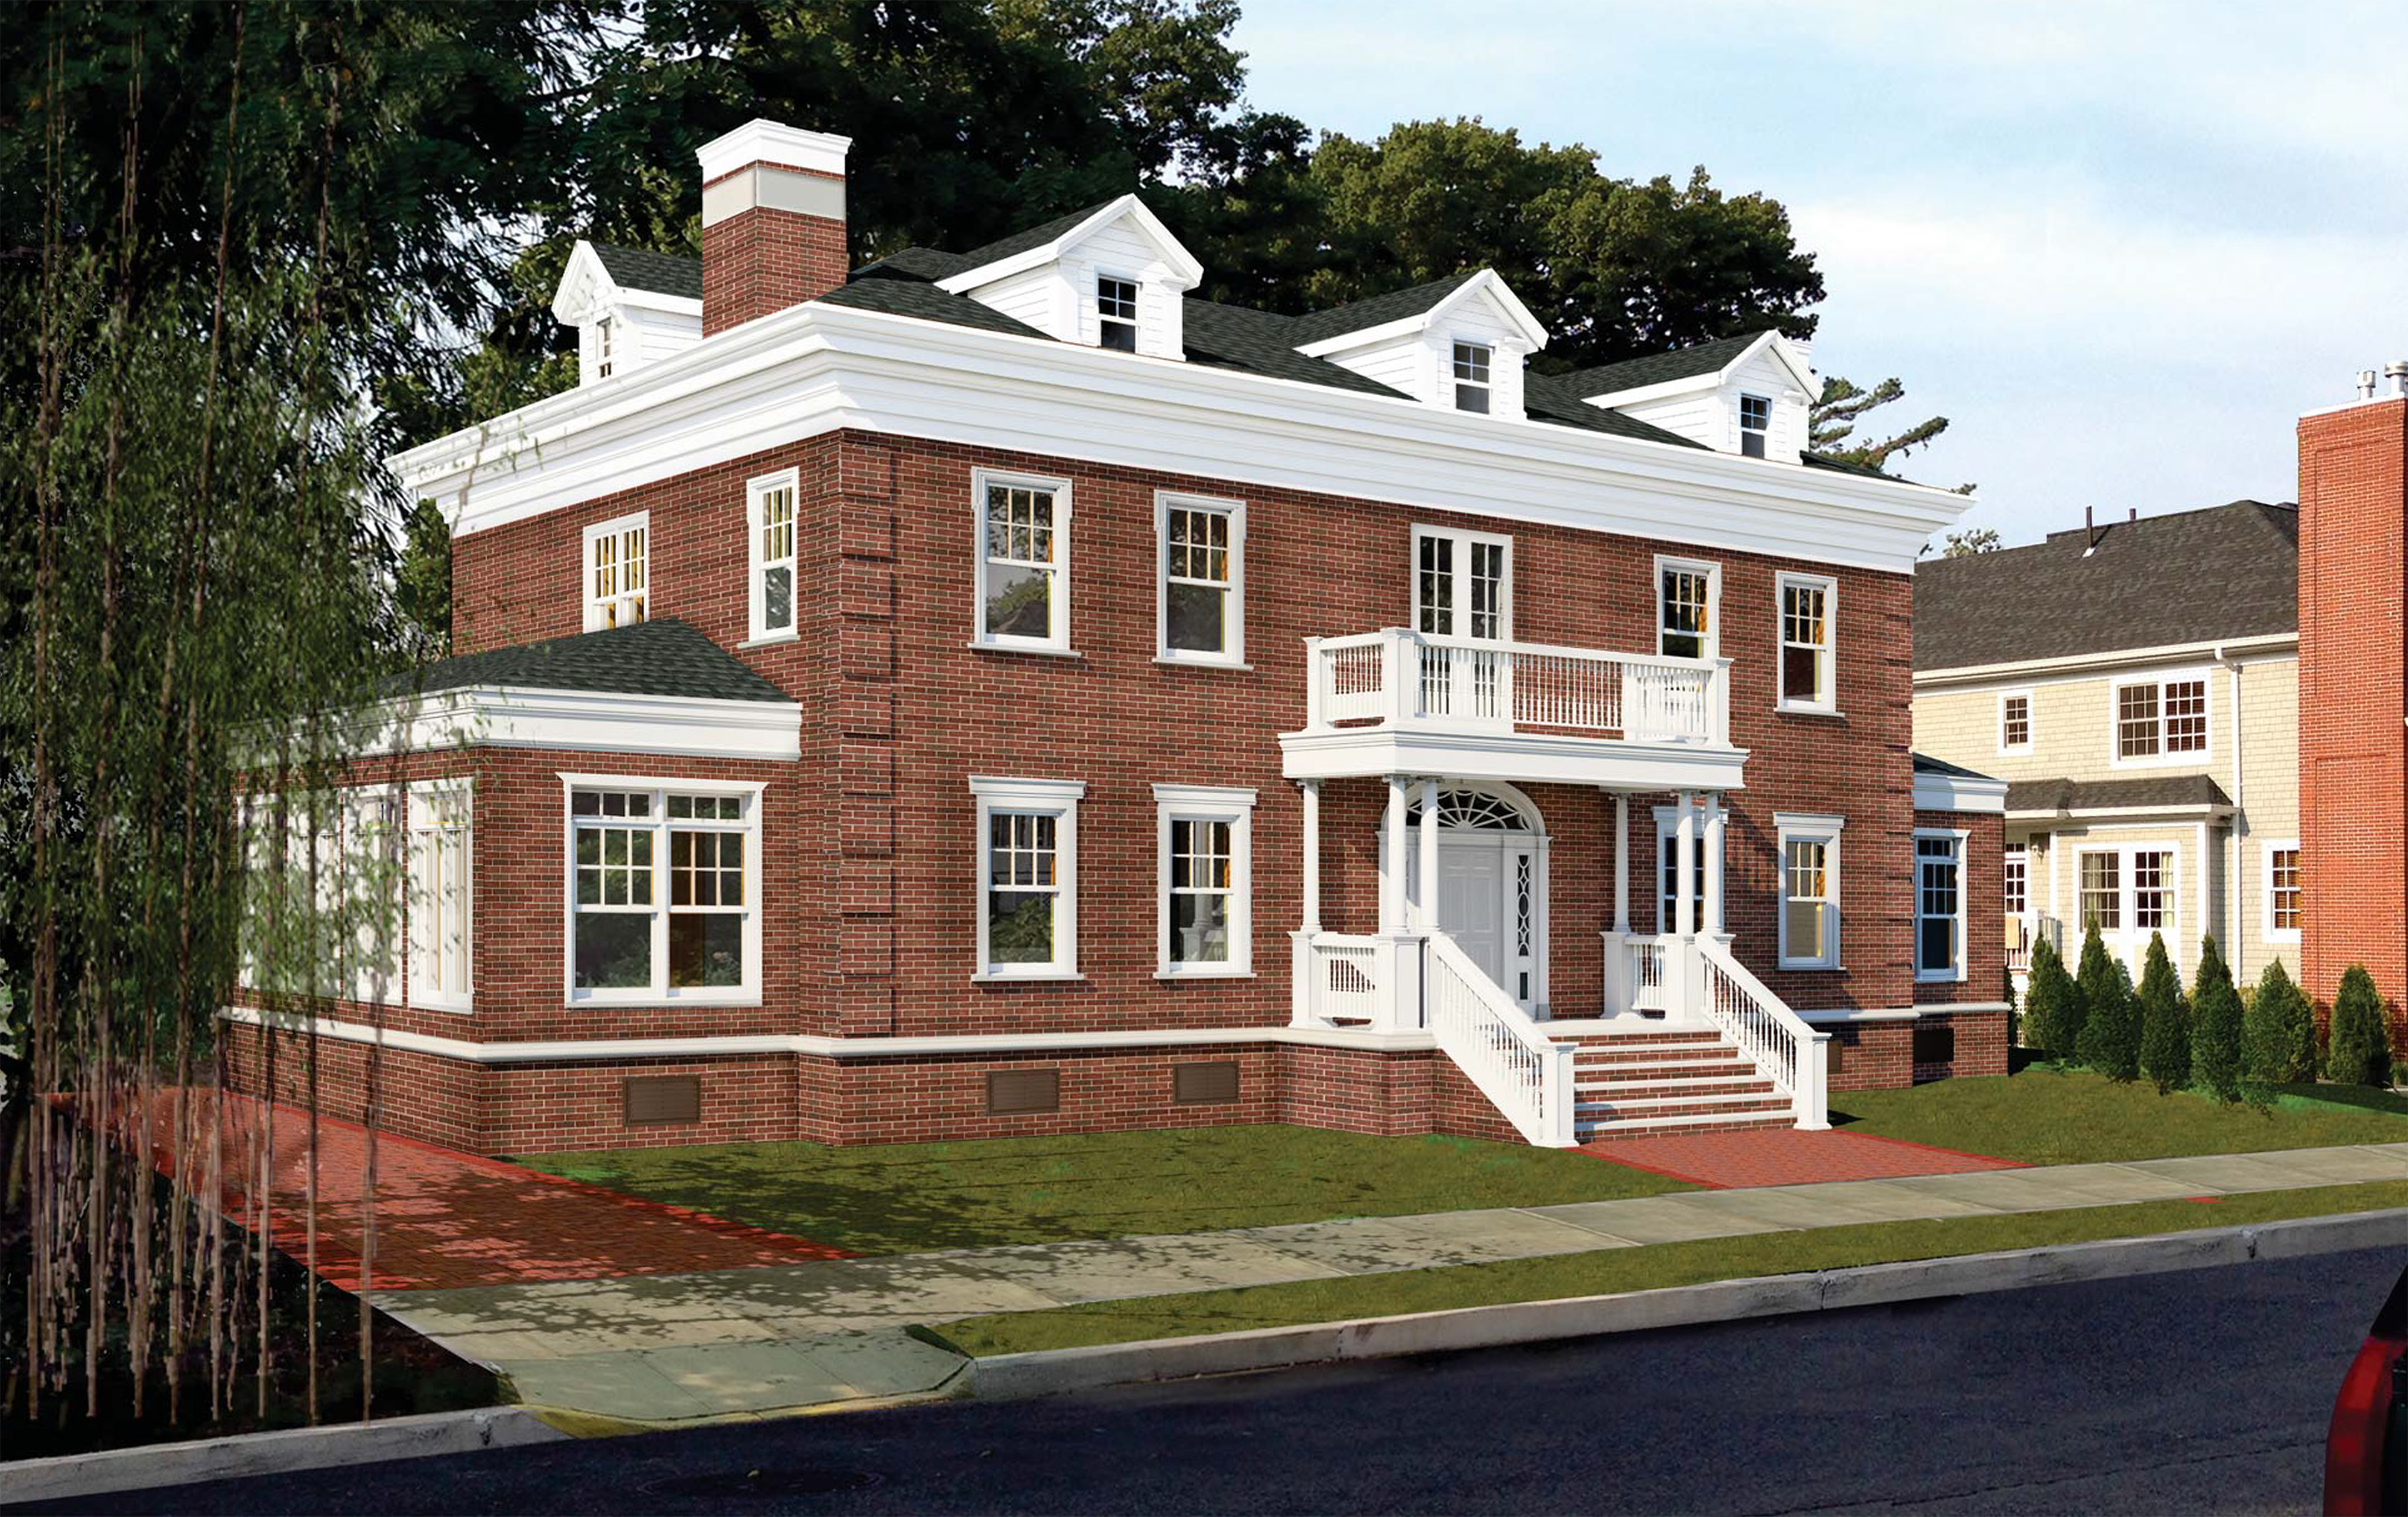 Proposal for new house at 233-33 38th Drive in Douglaston, Queens